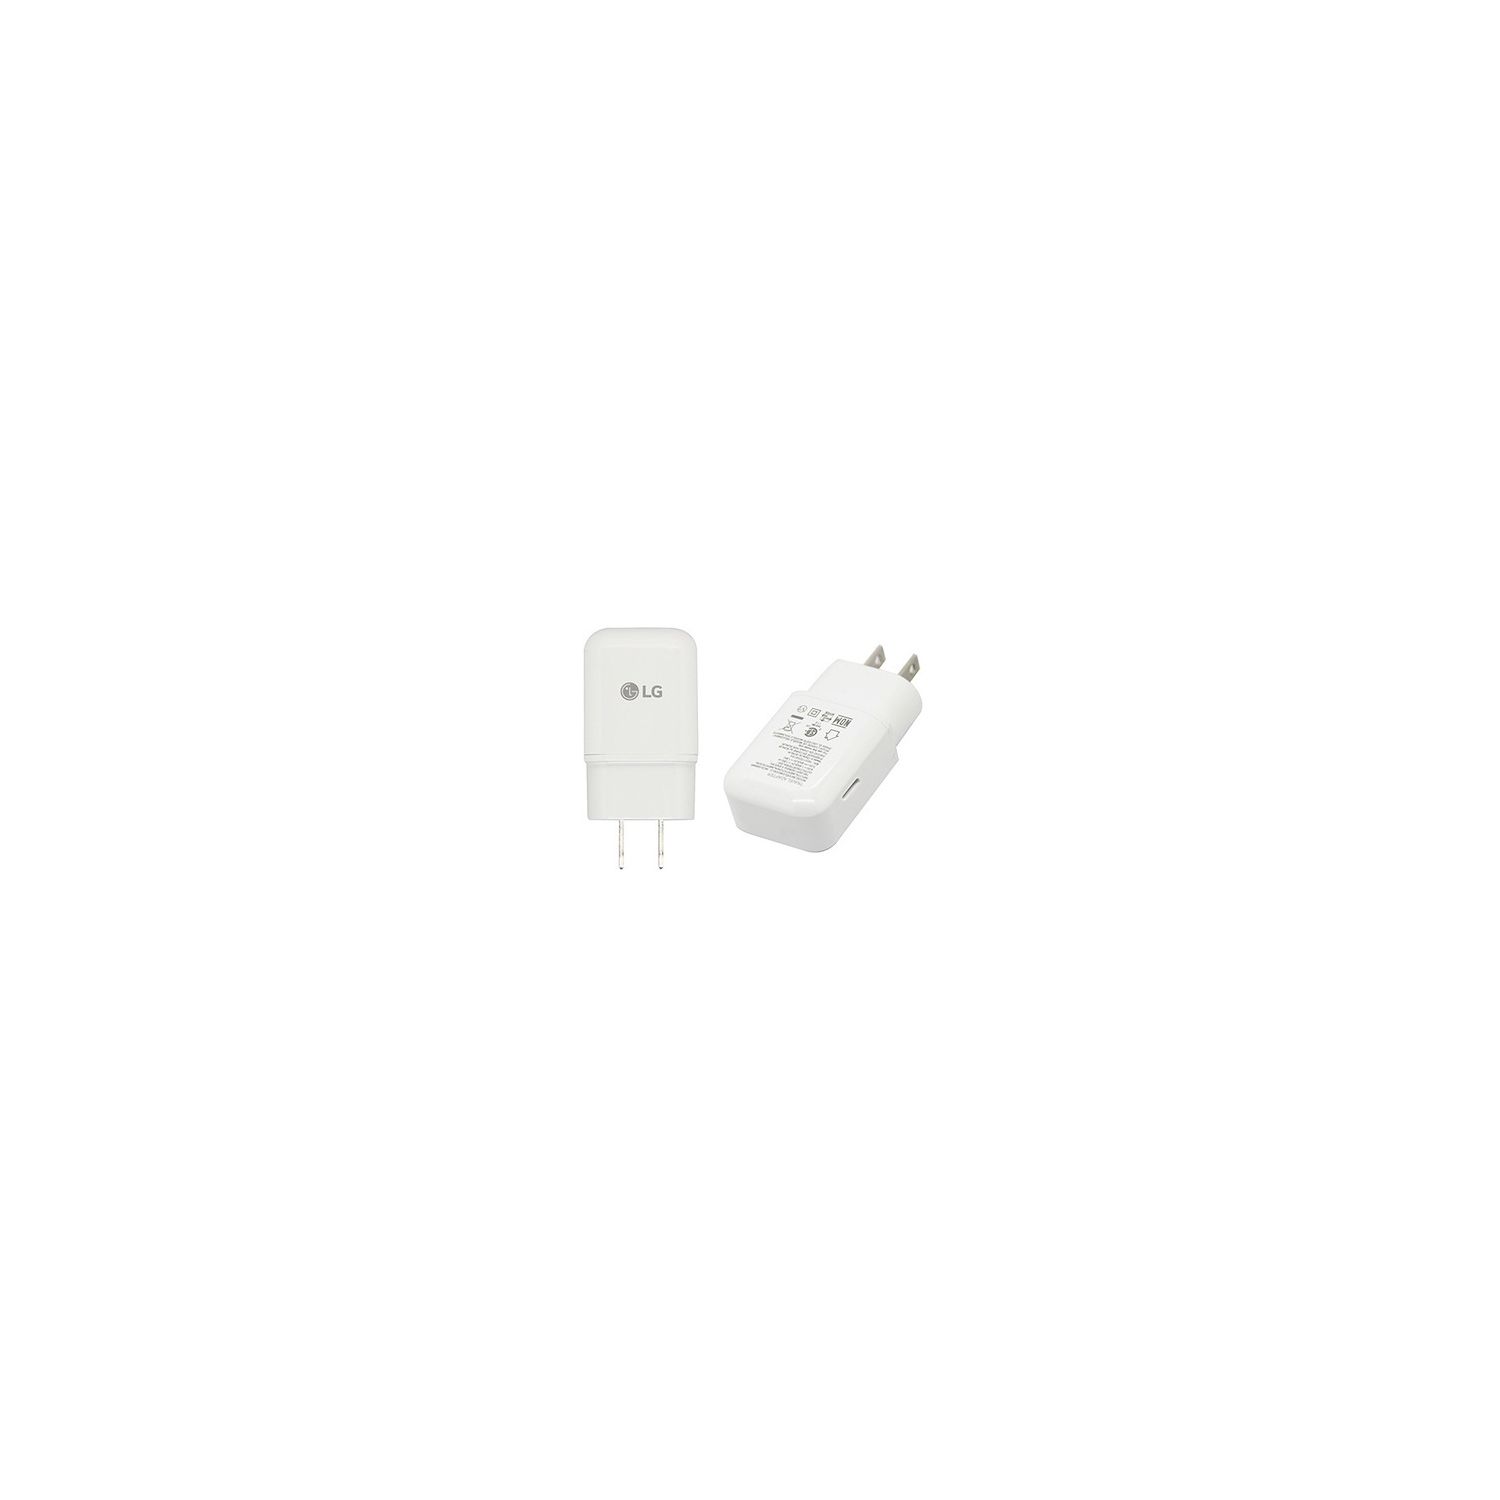 LG 3.0A Type C Adaptive Fast Wall Travel Charger for LG V20 V30 Q6 G6 G7 / Huawei Nexus 6P / Oneplus 2 3 5, White